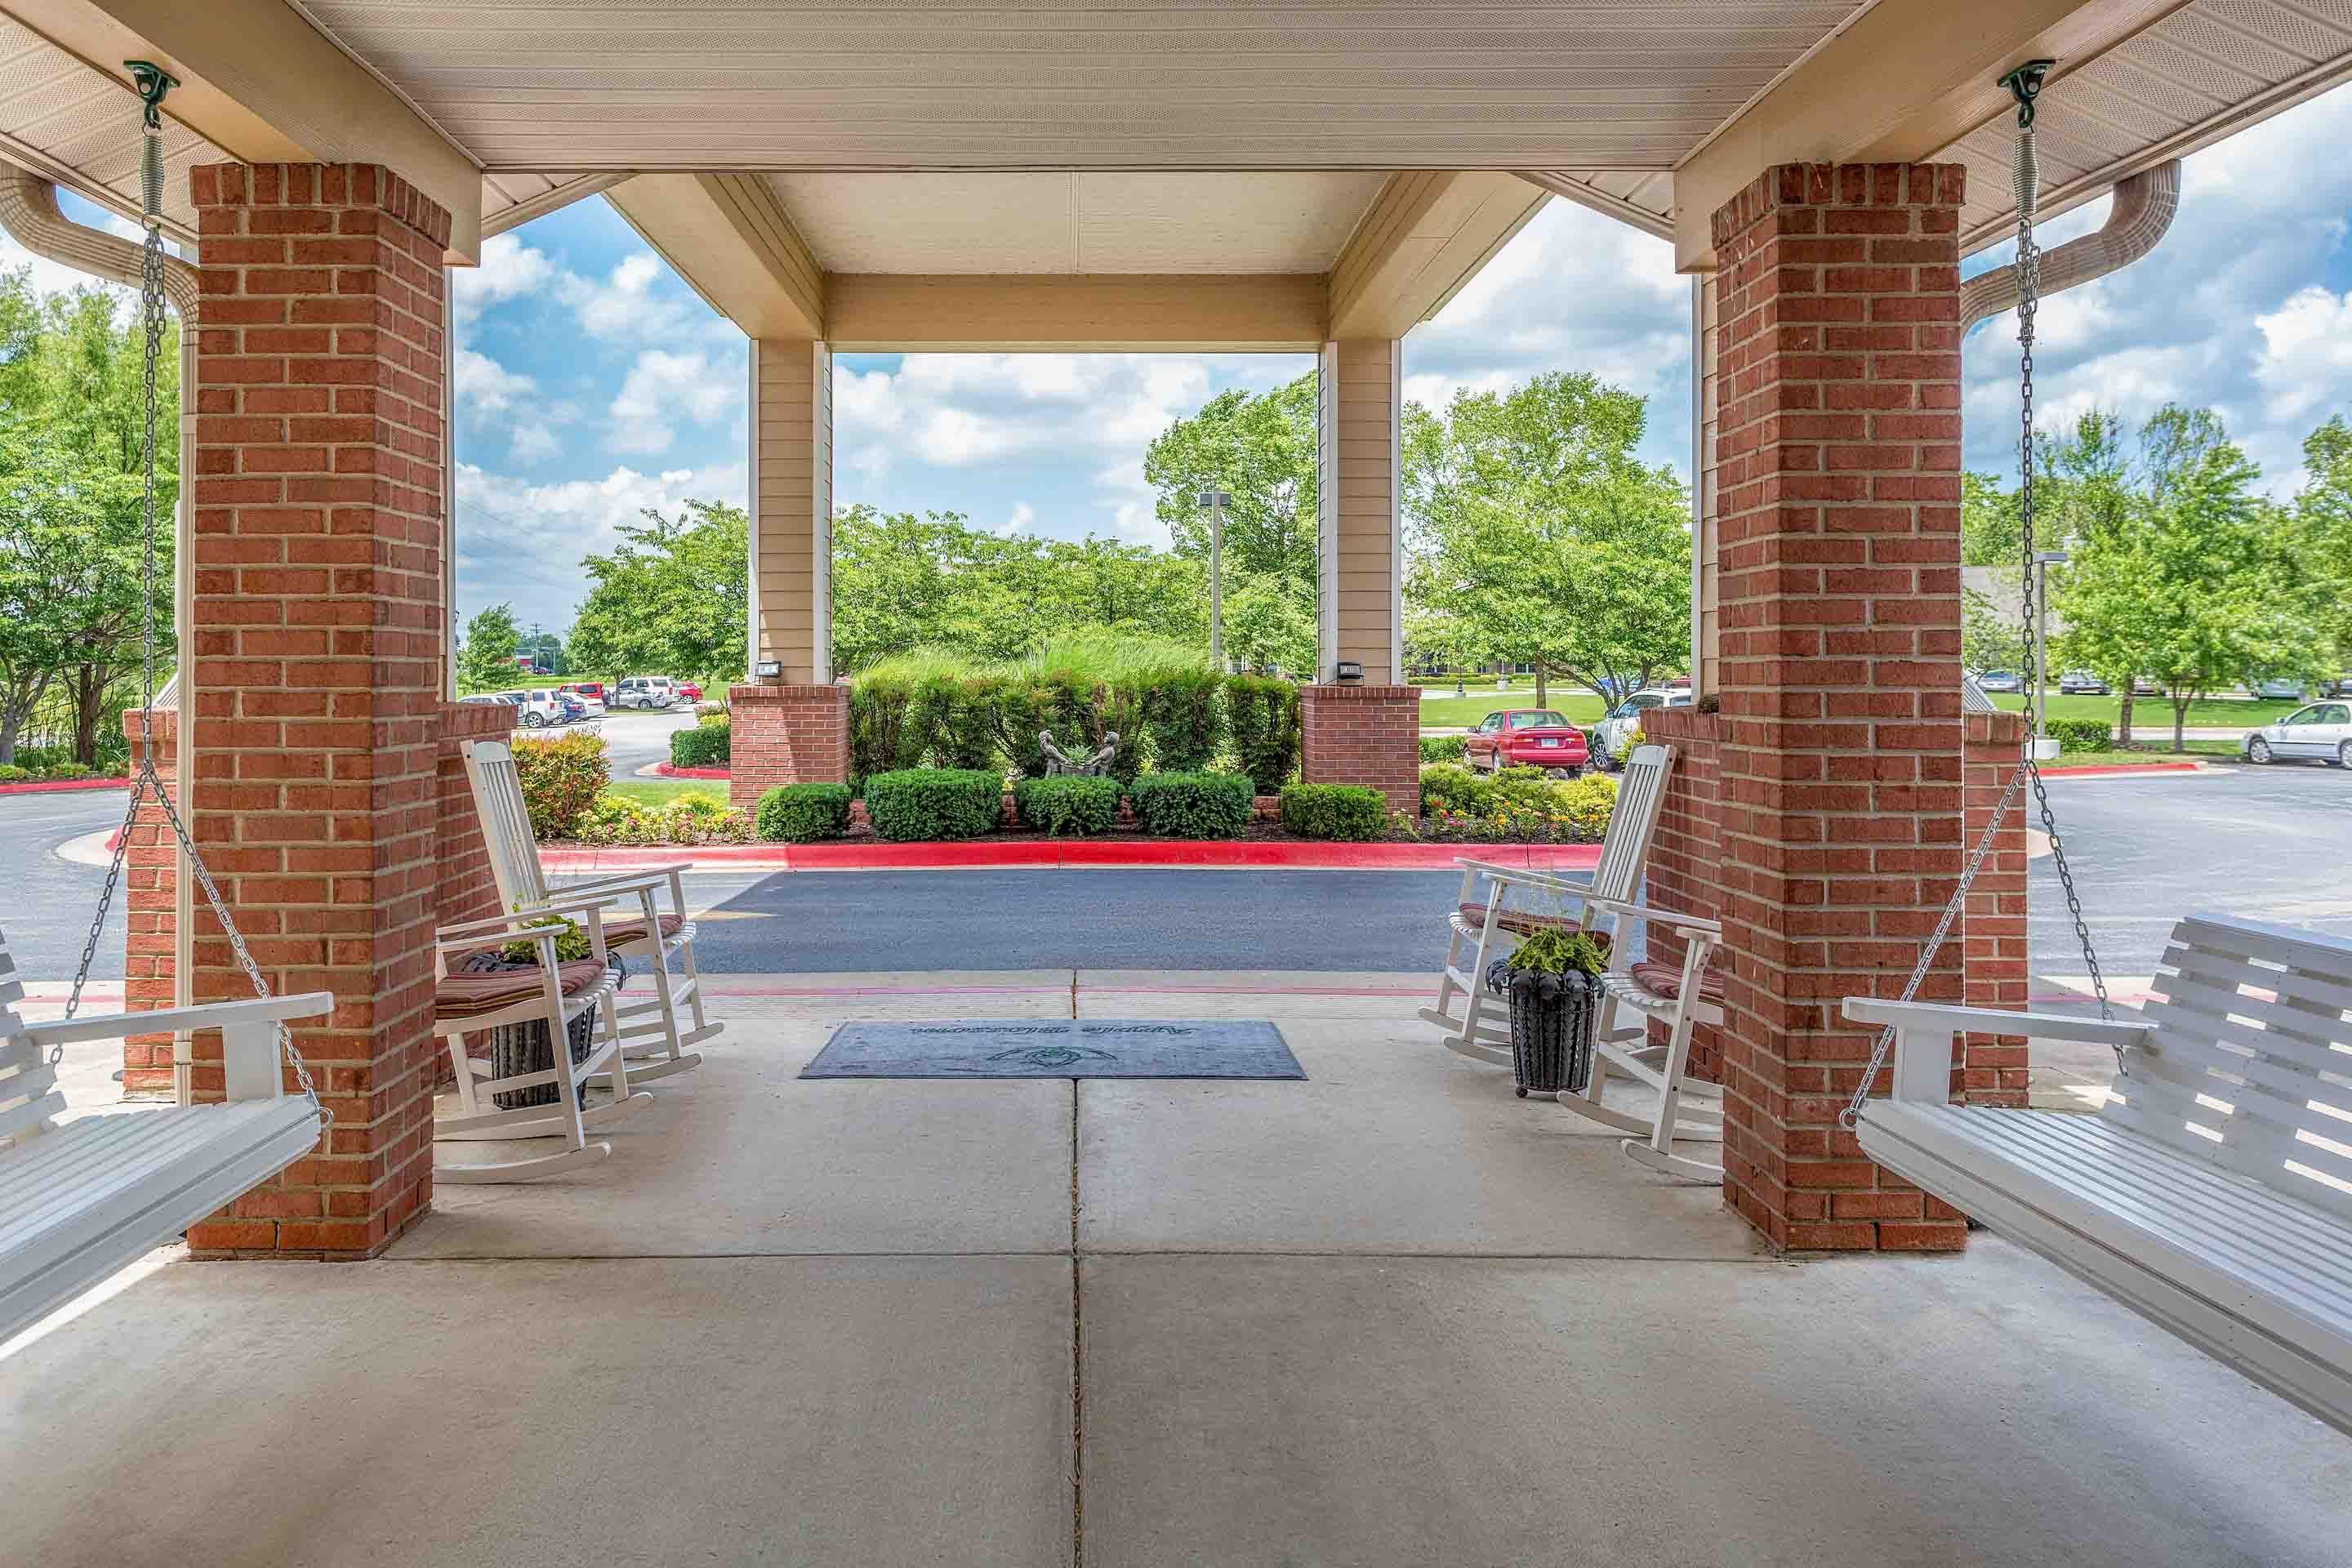 Senior living community Morada Rogers featuring houses, porch, outdoor benches, and cars.